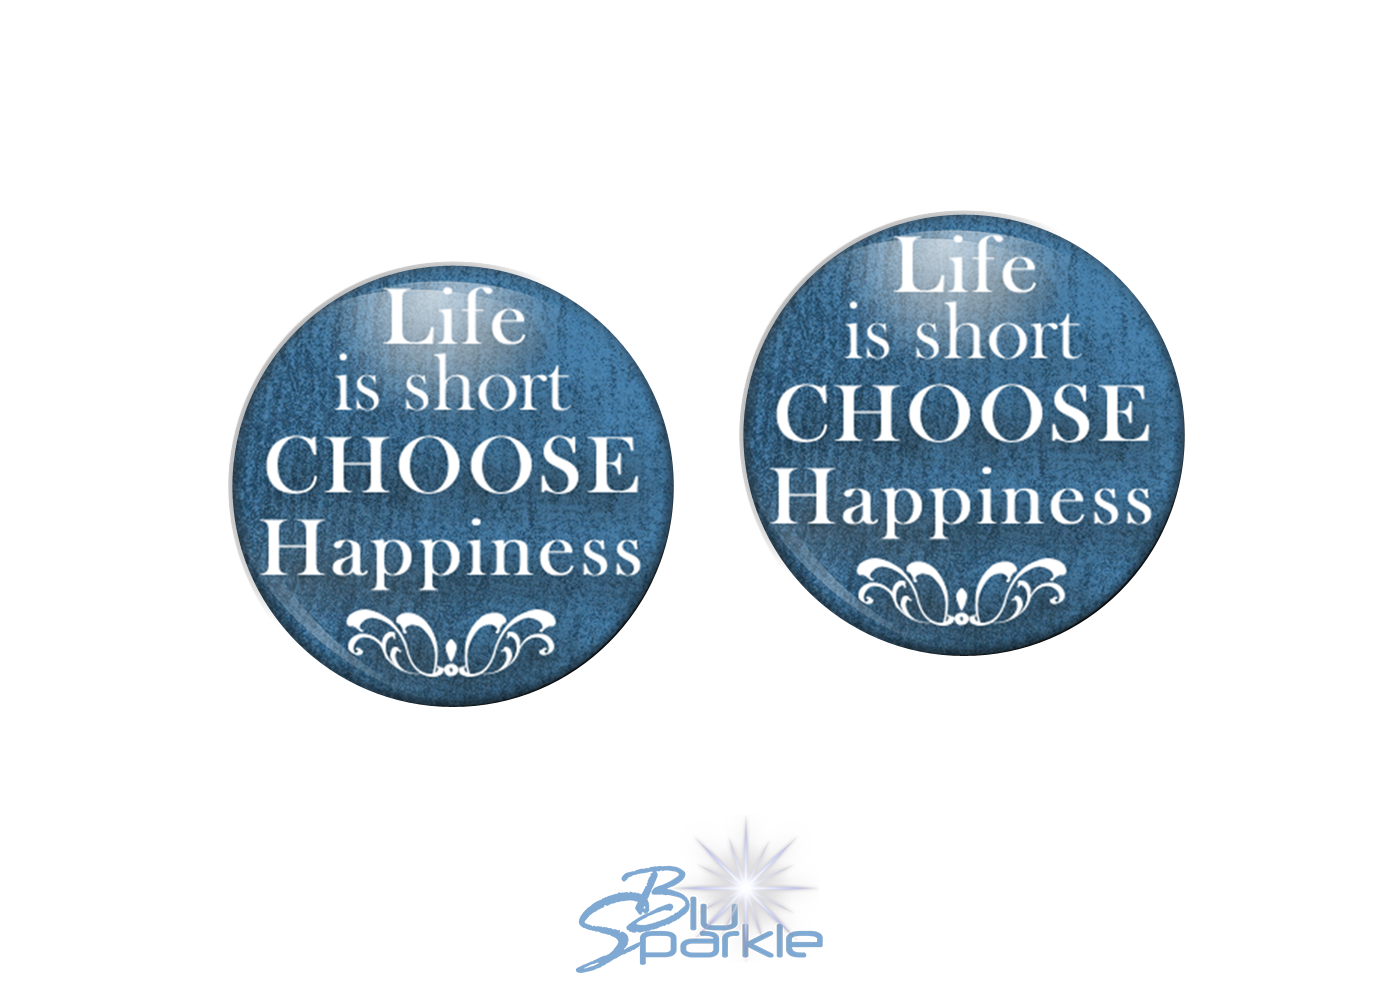 Life Is Short, Choose Happiness - Earrings